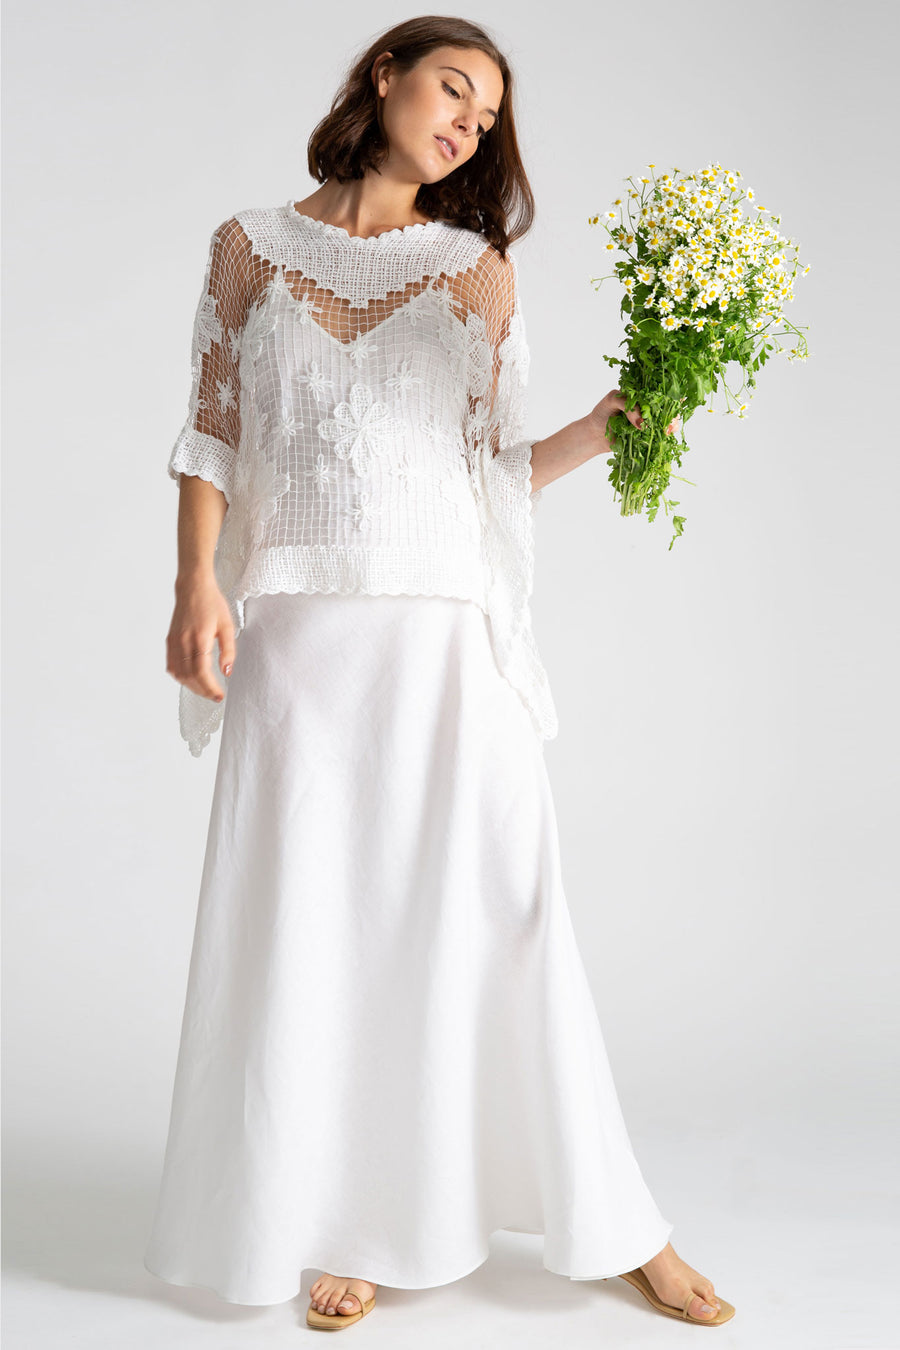 This is a photo of a woman wearing a white linen slip dress with a handmade white crochet knit poncho shawl on top and is holding a bouquet of mini daisies.